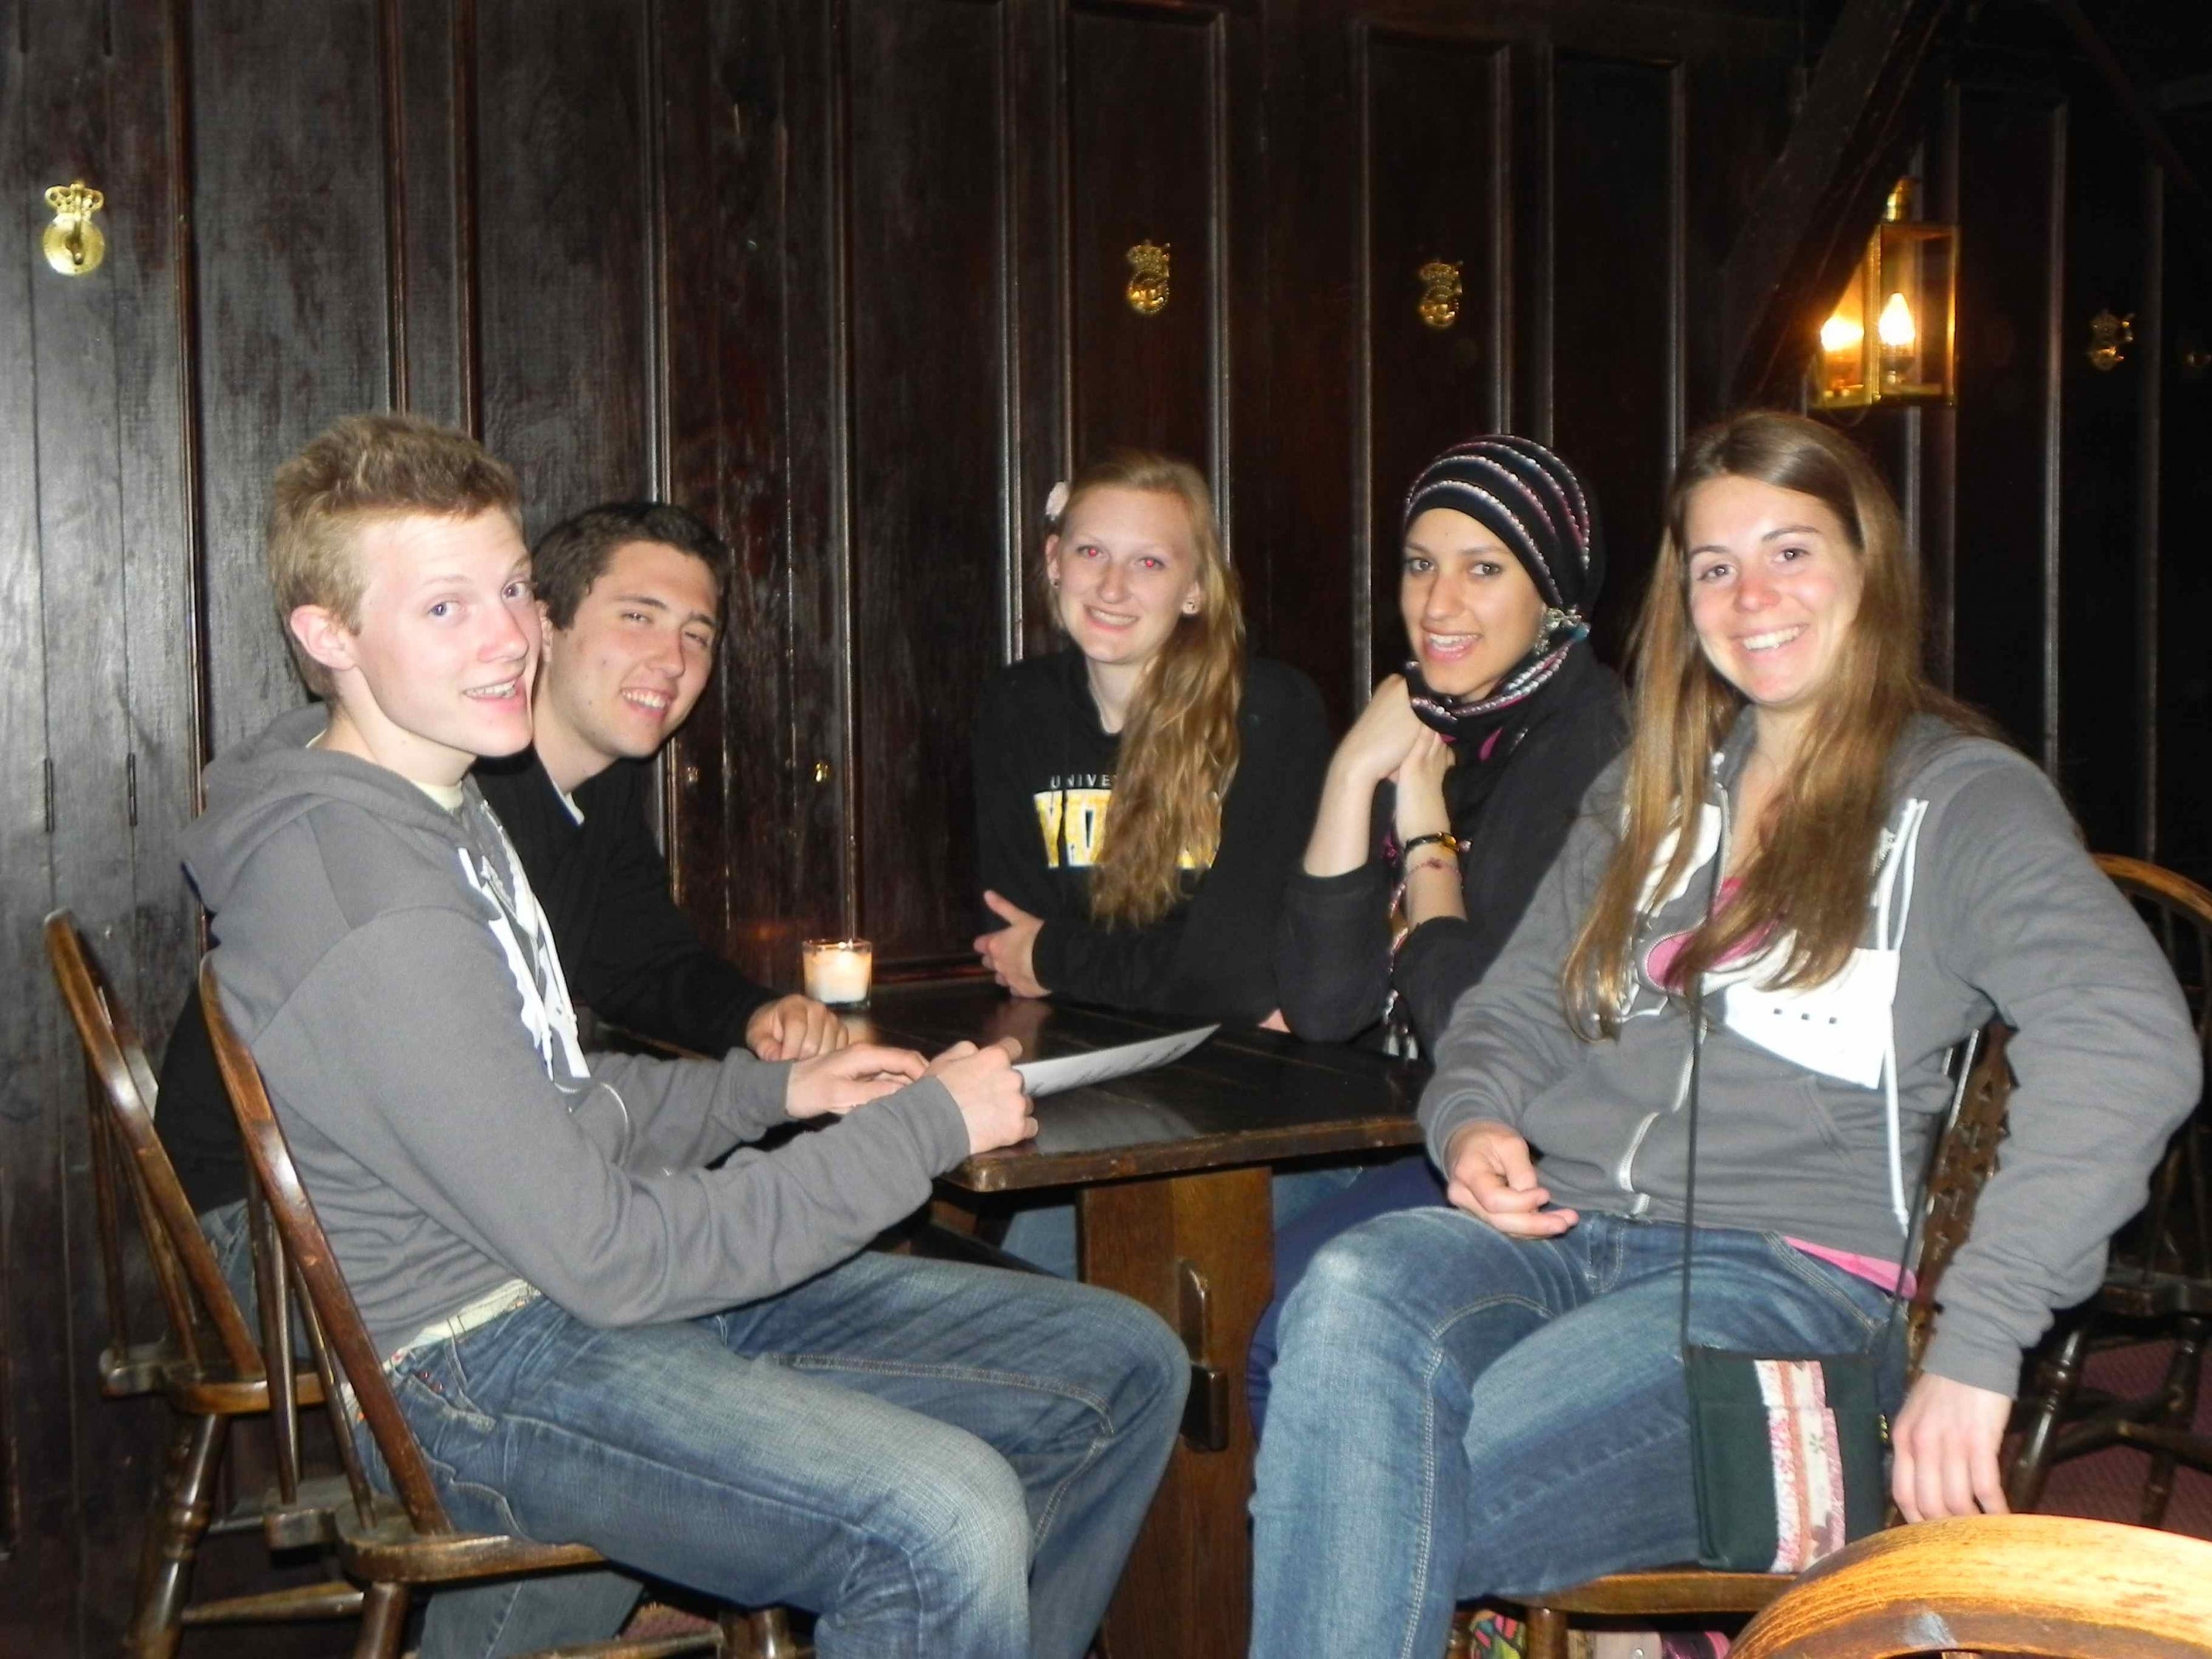 Students at a table